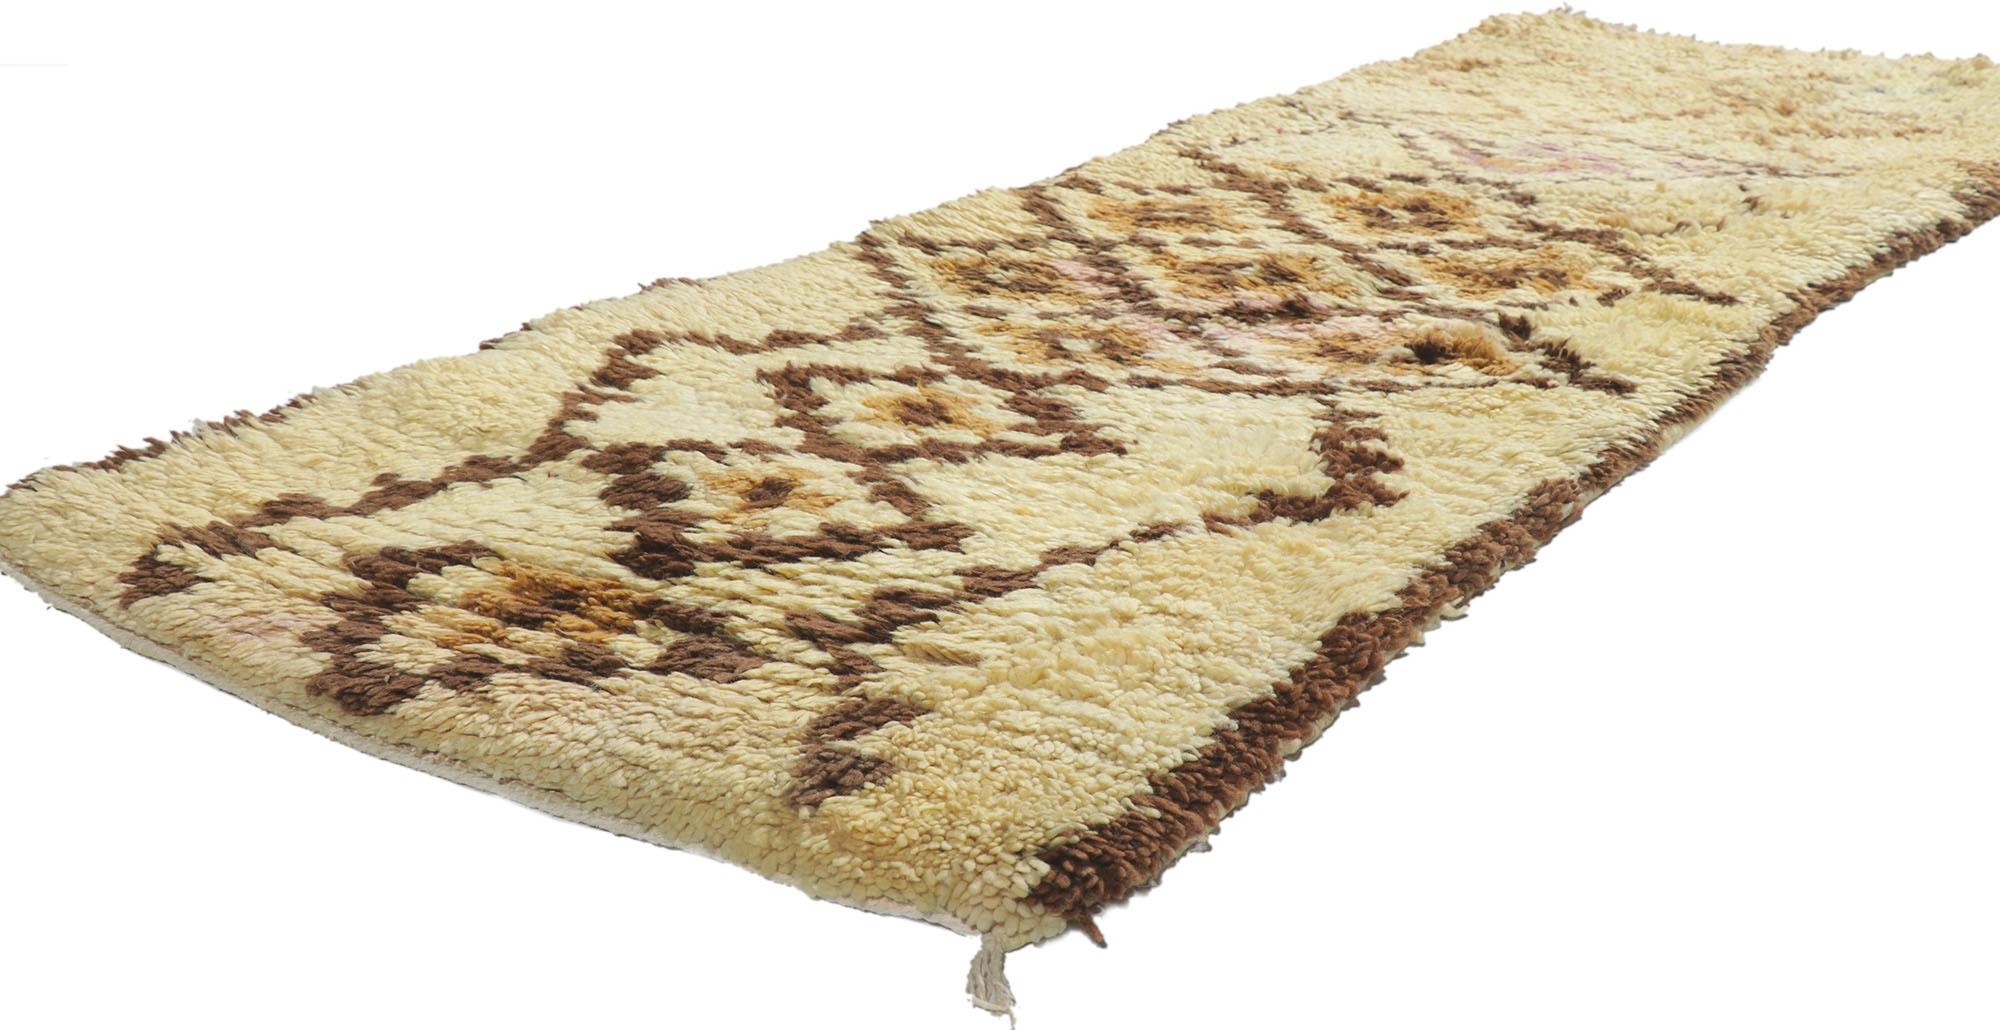 21611 Vintage Moroccan Azilal Rug, 02'04 x 05'10.
​Wabi-Sabi meets neutral bohemian in this hand knotted wool vintage Berber Moroccan Azilal rug. This vintage Moroccan Azilal rug weaves a spellingbinding lattice of lozenges, each imperfect, yet